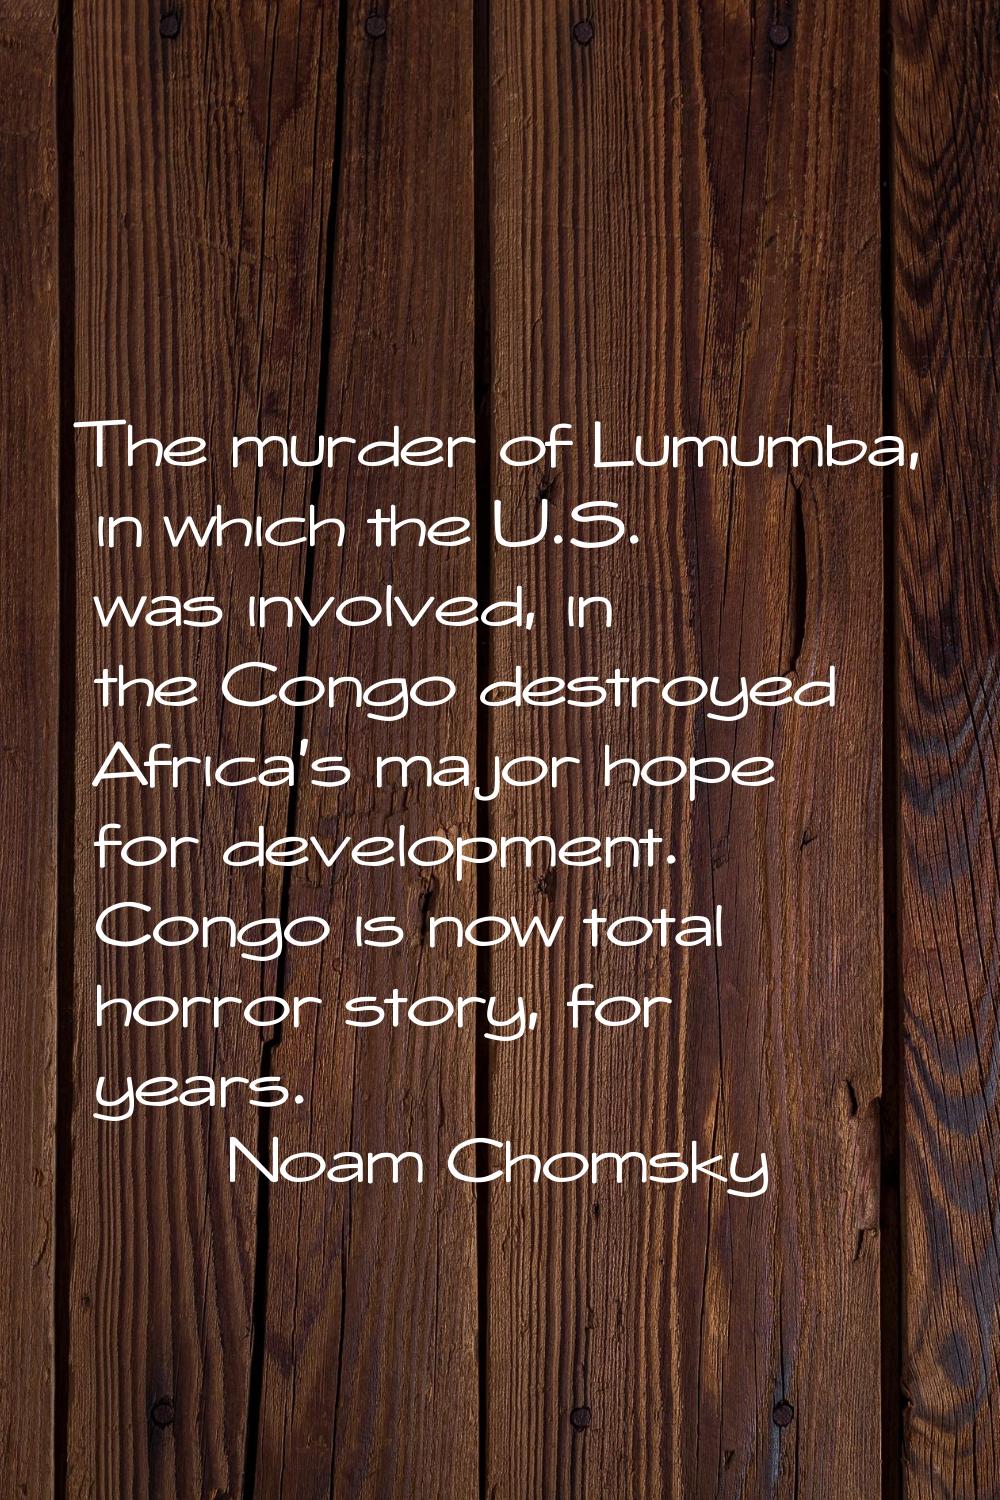 The murder of Lumumba, in which the U.S. was involved, in the Congo destroyed Africa's major hope f